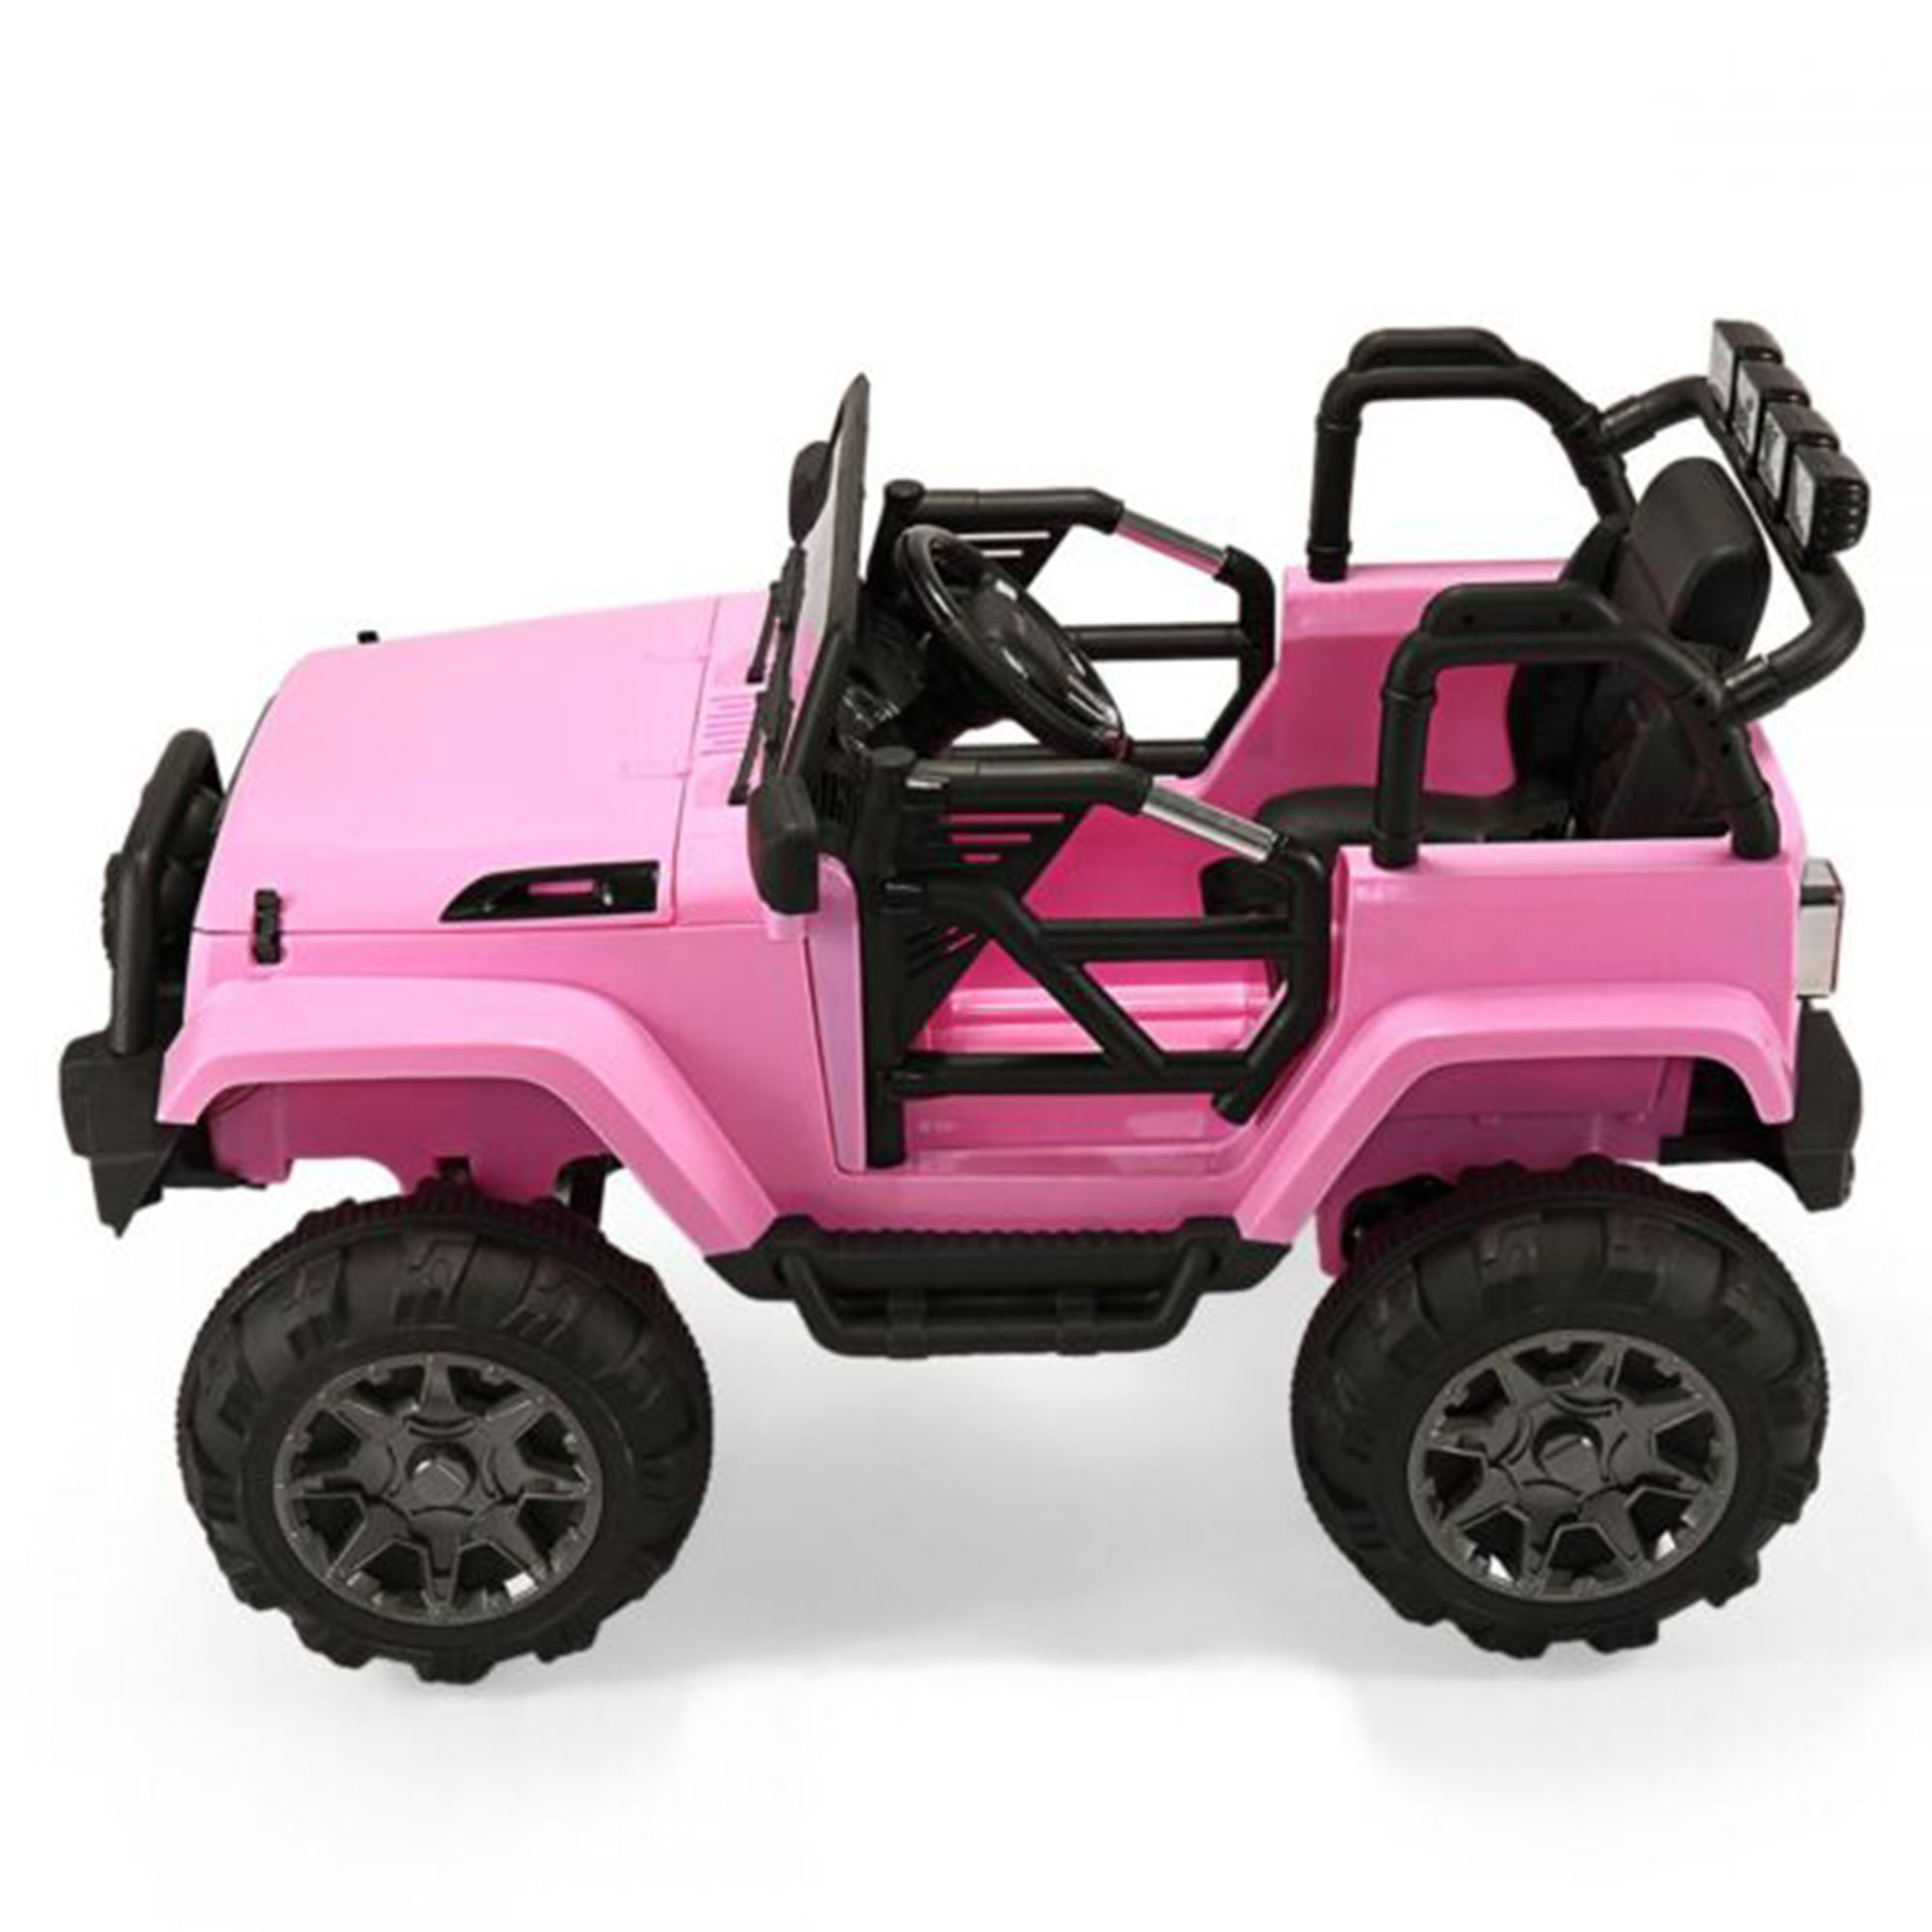 TOBBI 12V Kids Electric Battery Powered Jeep Wrangler Ride On Toy w/ Remote - image 2 of 12